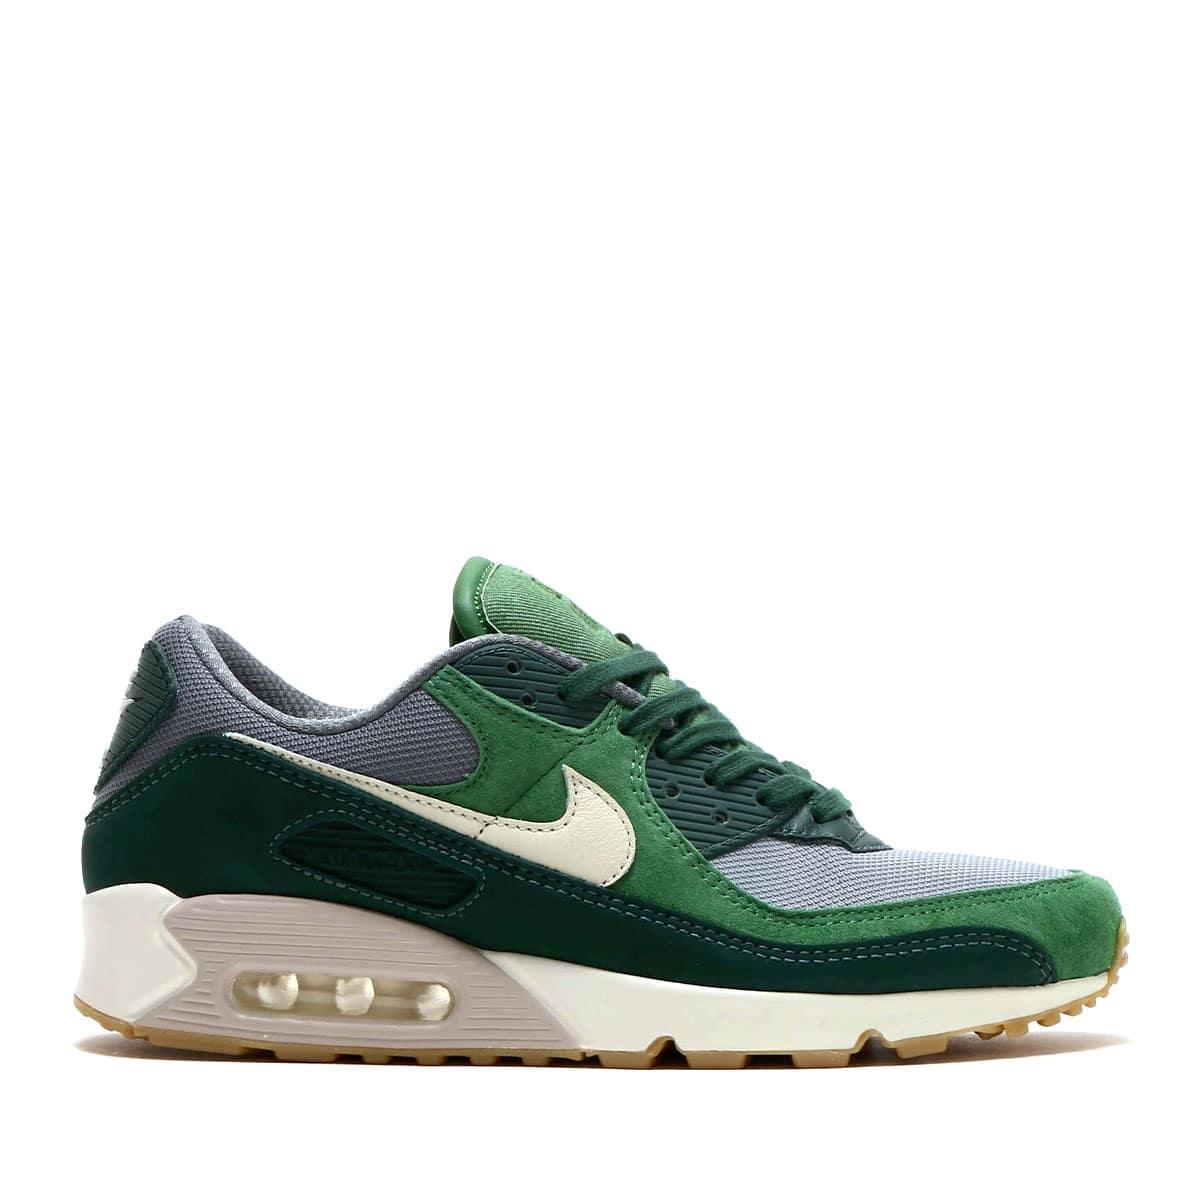 NIKE AIR MAX 90 PRM PRO GREEN/PALE IVORY-FOREST GREEN 22SP-I